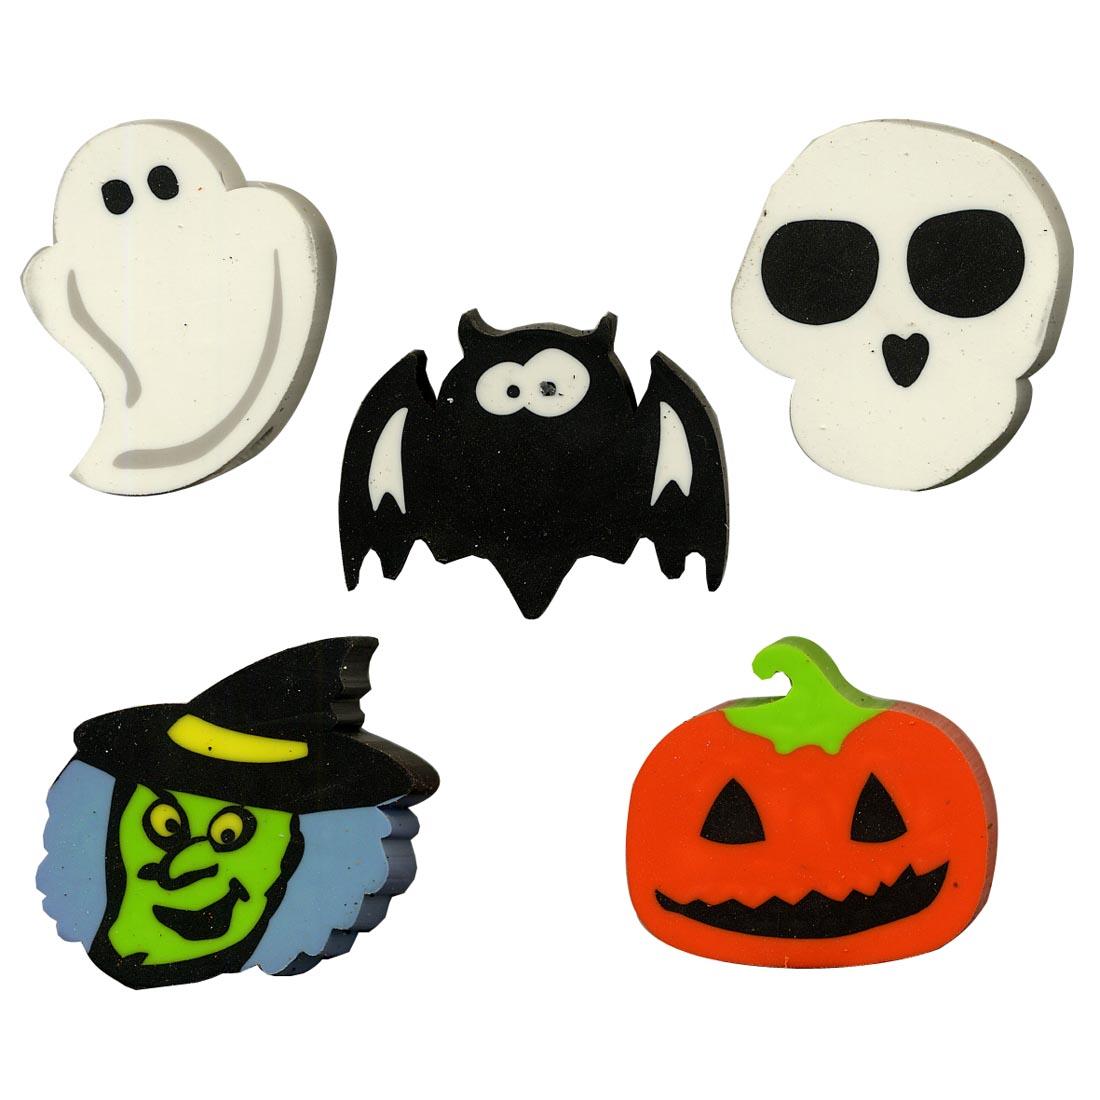 Halloween Pencil Topper Erasers include ghost, bat, skull, witch and jack-o-lantern